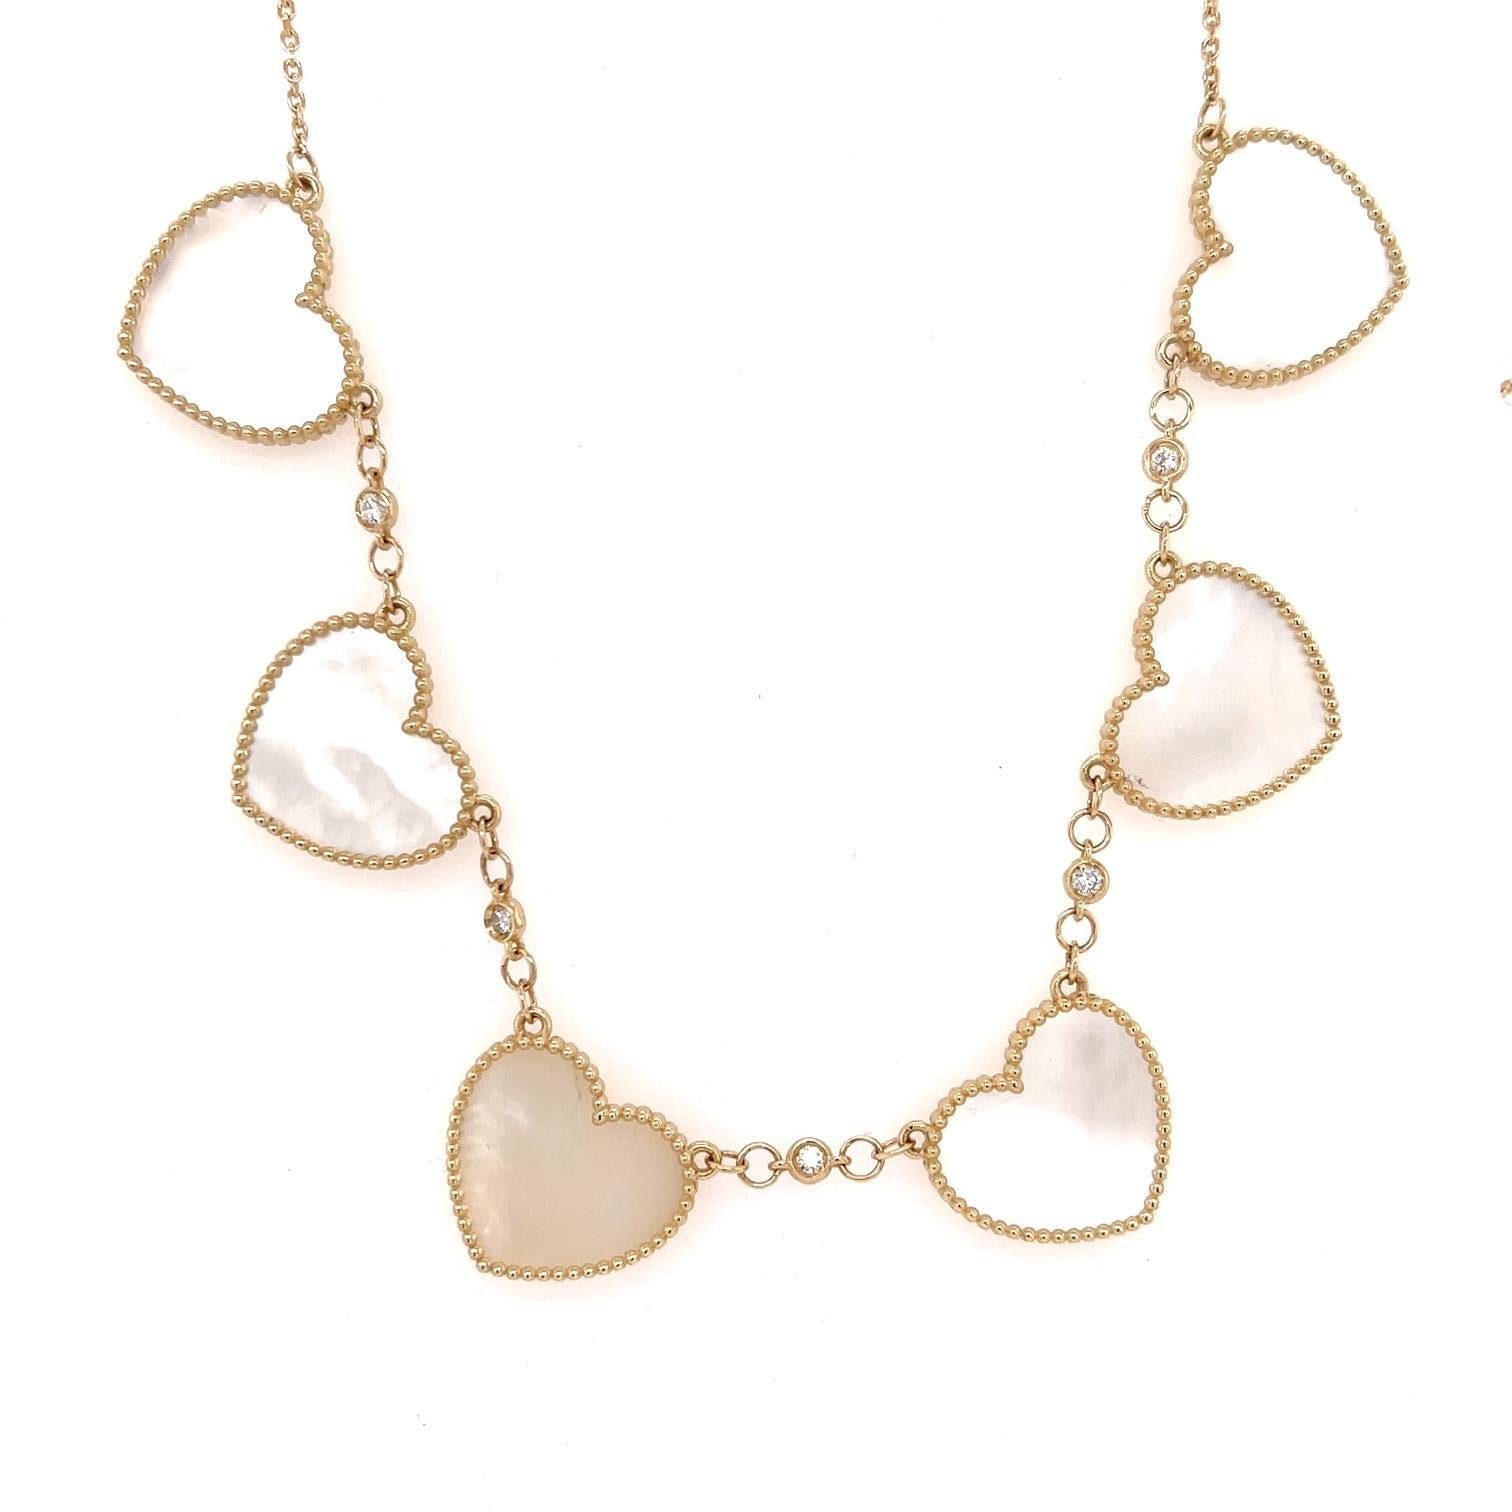 Add a bit of asymmetrical charm to your life with this lovely necklace! PRICE: .00